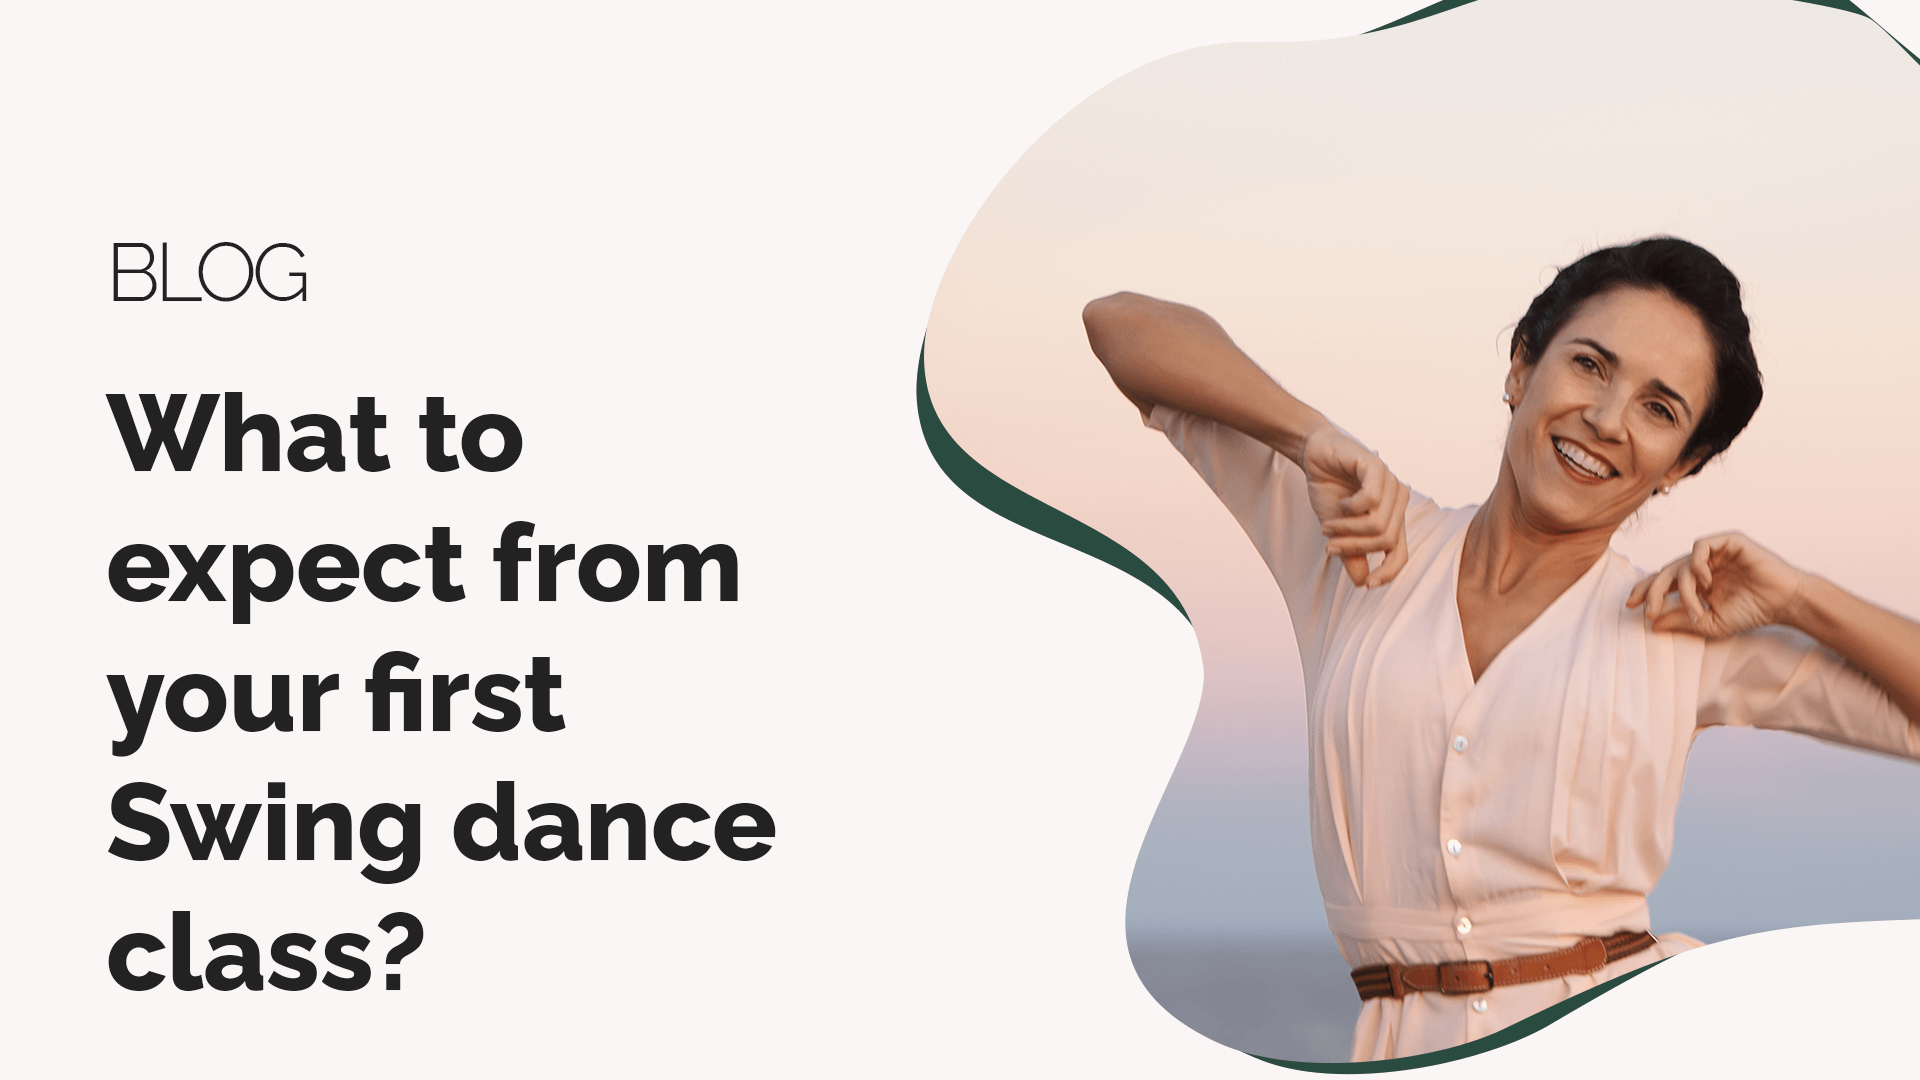 What to expect from your first swing dance class